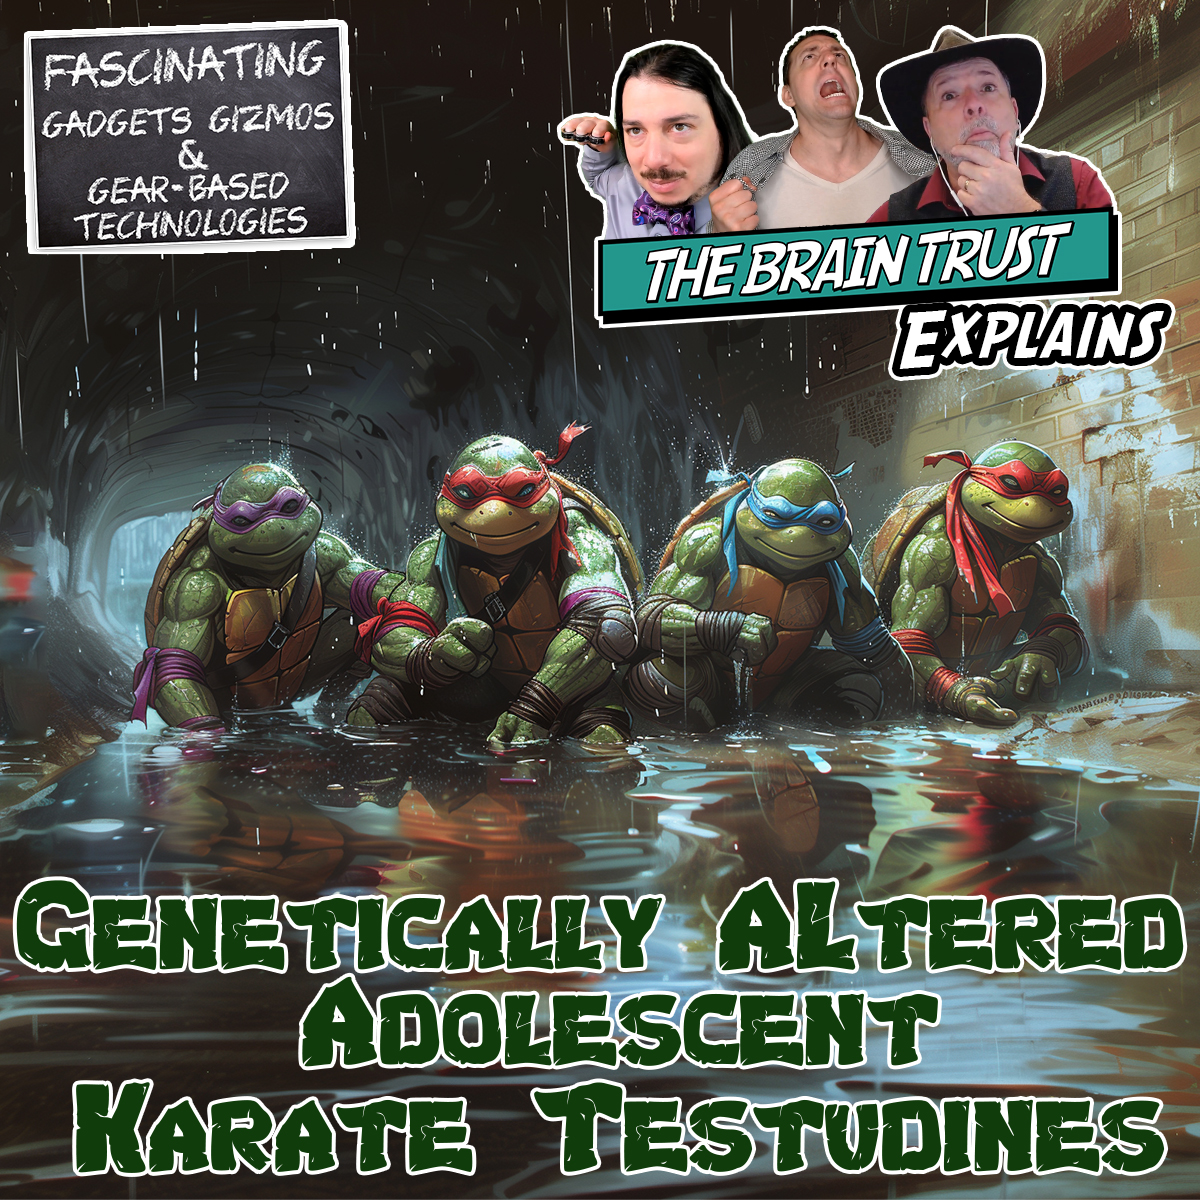 You are currently viewing Ep. 183 Genetically Altered, Adolescent, Karate Testudies